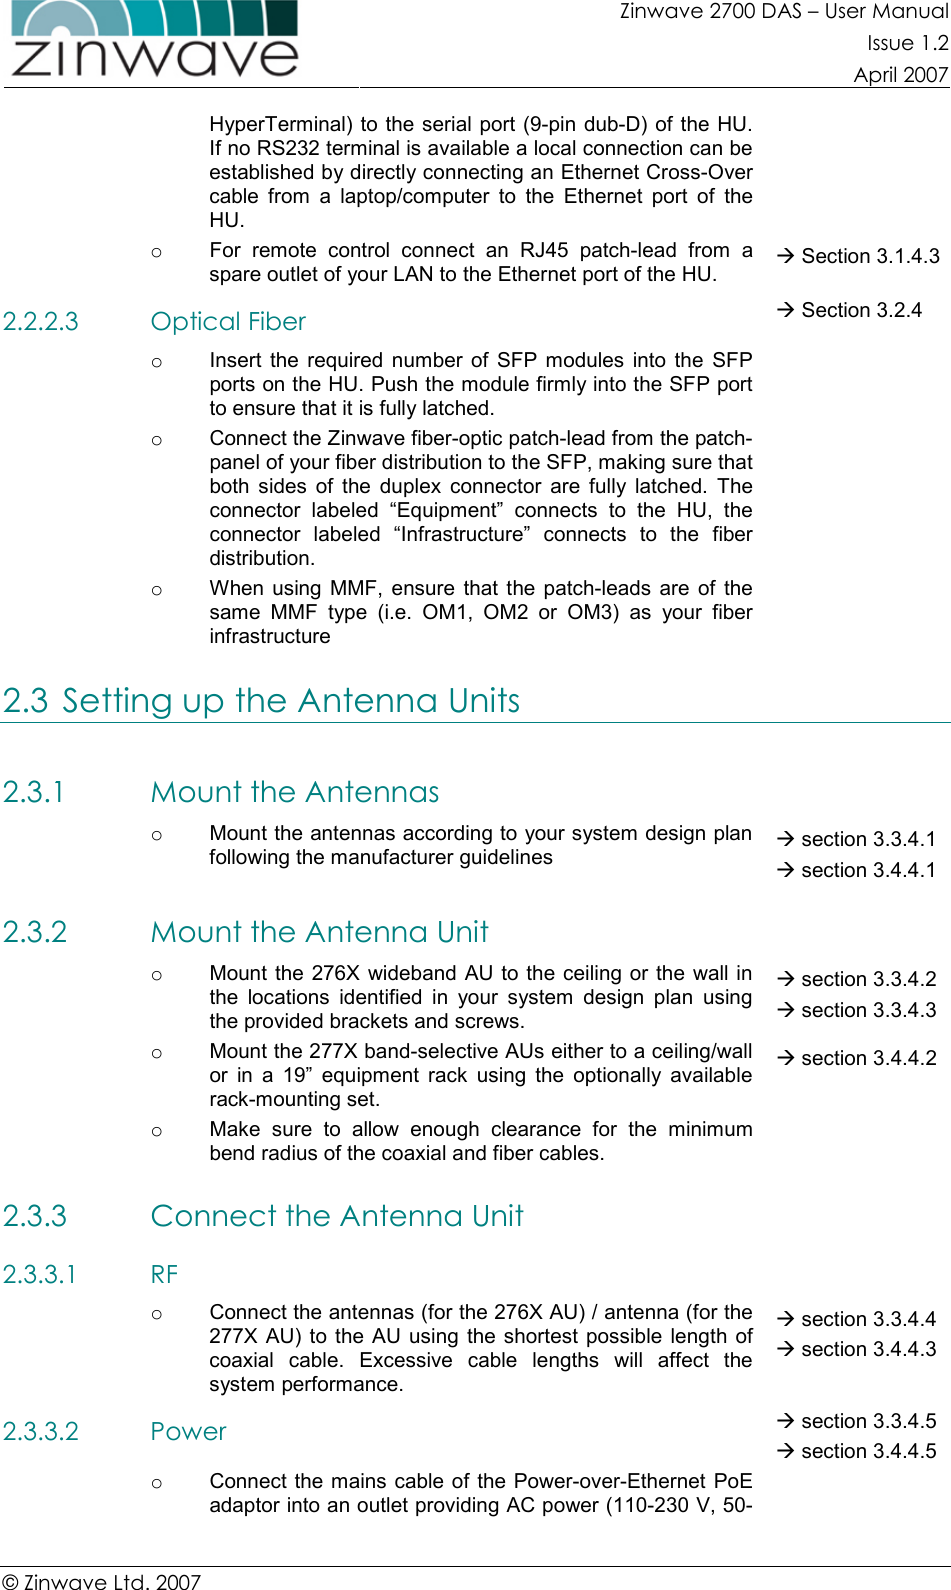 Zinwave 2700 DAS – User Manual Issue 1.2  April 2007  © Zinwave Ltd. 2007  HyperTerminal) to the serial port (9-pin dub-D) of the HU. If no RS232 terminal is available a local connection can be established by directly connecting an Ethernet Cross-Over cable  from  a  laptop/computer  to  the  Ethernet  port  of  the HU. o  For  remote  control  connect  an  RJ45  patch-lead  from  a spare outlet of your LAN to the Ethernet port of the HU.  Section 3.1.4.3 2.2.2.3 Optical Fiber  Section 3.2.4 o  Insert  the  required  number  of  SFP modules  into  the  SFP ports on the HU. Push the module firmly into the SFP port to ensure that it is fully latched.  o  Connect the Zinwave fiber-optic patch-lead from the patch-panel of your fiber distribution to the SFP, making sure that both  sides  of  the  duplex  connector  are  fully  latched.  The connector  labeled  “Equipment”  connects  to  the  HU,  the connector  labeled  “Infrastructure”  connects  to  the  fiber distribution.  o  When using  MMF, ensure  that  the  patch-leads  are  of  the same  MMF  type  (i.e.  OM1,  OM2  or  OM3)  as  your  fiber infrastructure  2.3 Setting up the Antenna Units 2.3.1 Mount the Antennas  o  Mount the antennas according to your system design plan following the manufacturer guidelines  section 3.3.4.1  section 3.4.4.1 2.3.2 Mount the Antenna Unit  o  Mount the 276X wideband AU to the ceiling or the wall in the  locations  identified  in  your  system  design  plan  using the provided brackets and screws.  section 3.3.4.2  section 3.3.4.3 o  Mount the 277X band-selective AUs either to a ceiling/wall or  in  a  19”  equipment  rack  using  the  optionally  available rack-mounting set.   section 3.4.4.2 o  Make  sure  to  allow  enough  clearance  for  the  minimum bend radius of the coaxial and fiber cables.   2.3.3 Connect the Antenna Unit  2.3.3.1 RF  o  Connect the antennas (for the 276X AU) / antenna (for the 277X AU) to  the AU using the shortest possible  length of coaxial  cable.  Excessive  cable  lengths  will  affect  the system performance.  section 3.3.4.4  section 3.4.4.3 2.3.3.2 Power  section 3.3.4.5  section 3.4.4.5 o  Connect the mains cable of the Power-over-Ethernet  PoE adaptor into an outlet providing AC power (110-230 V, 50-  